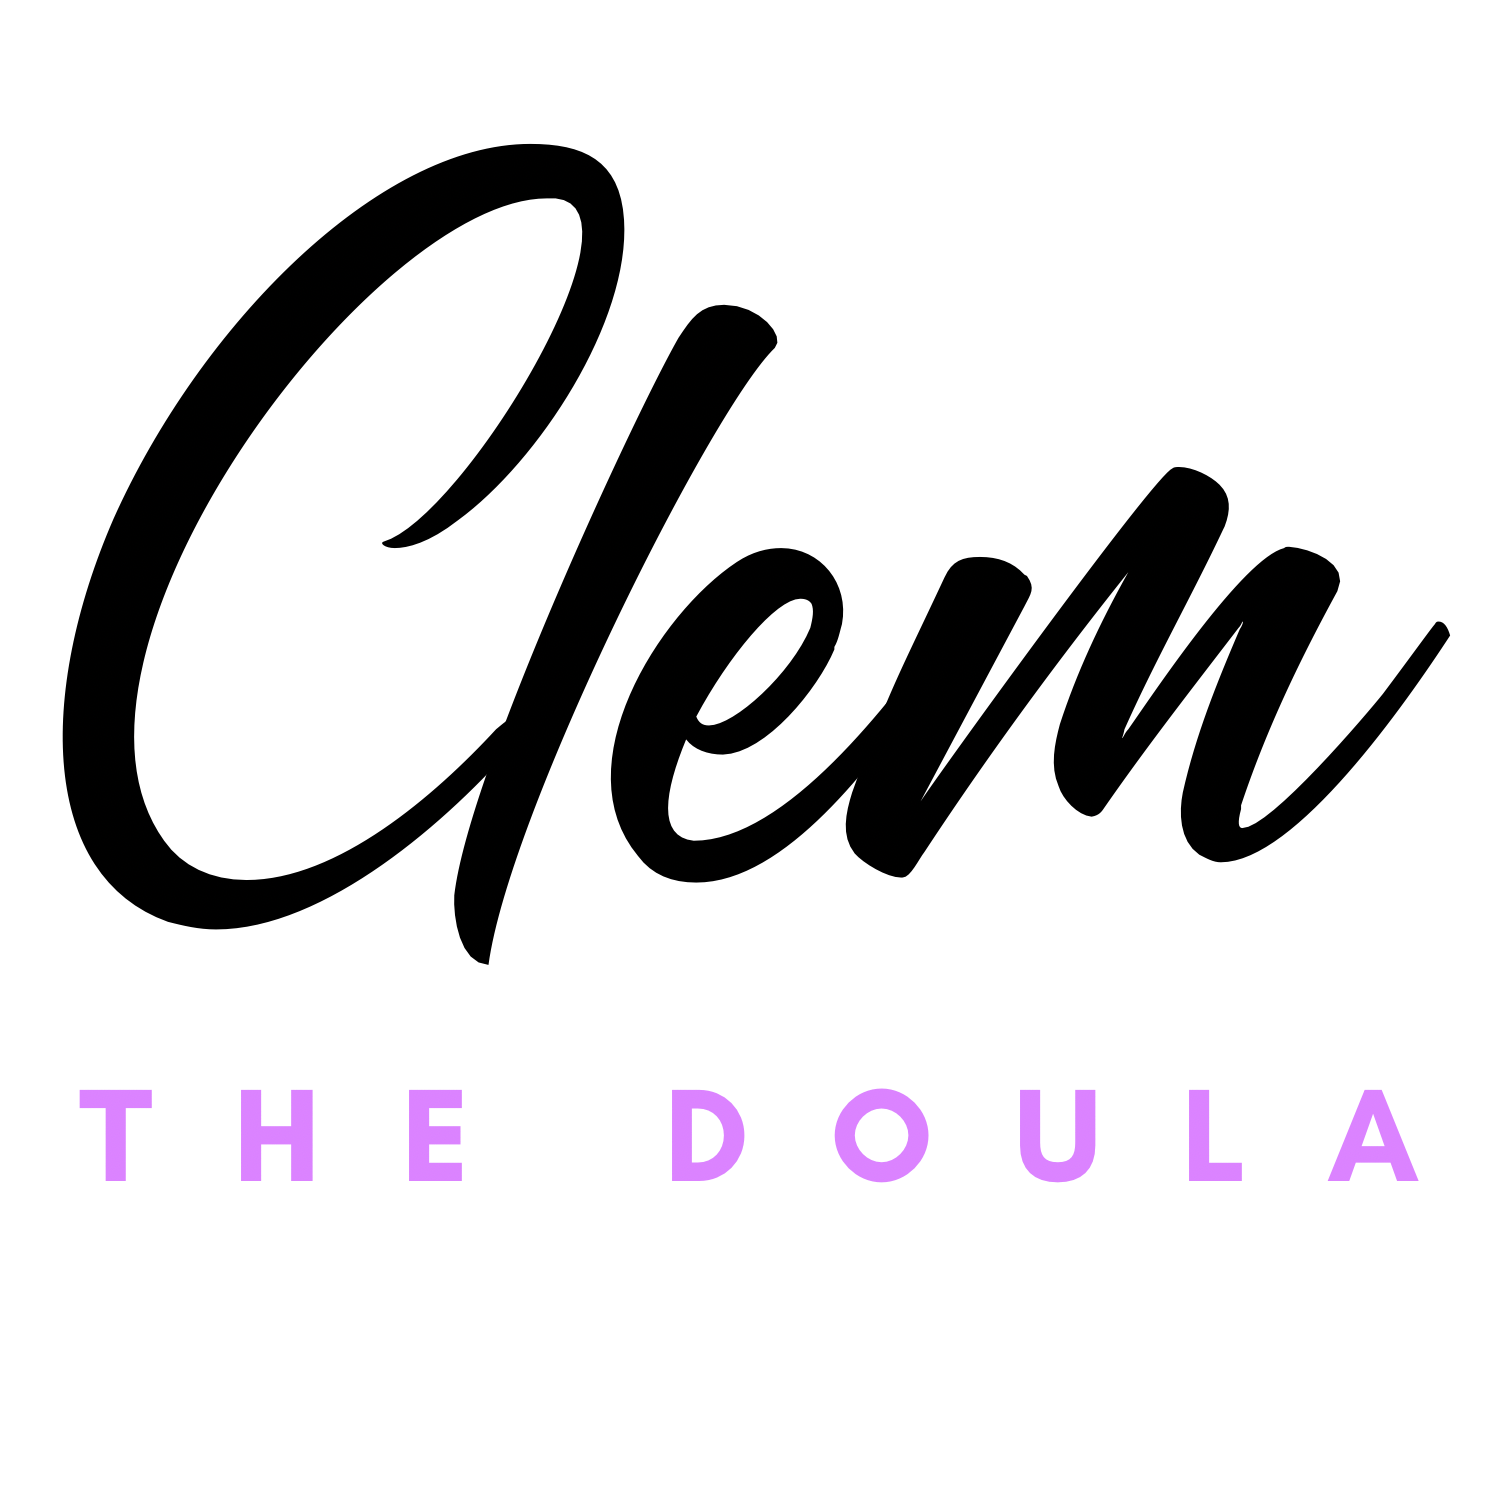 Clem the Doula's Image